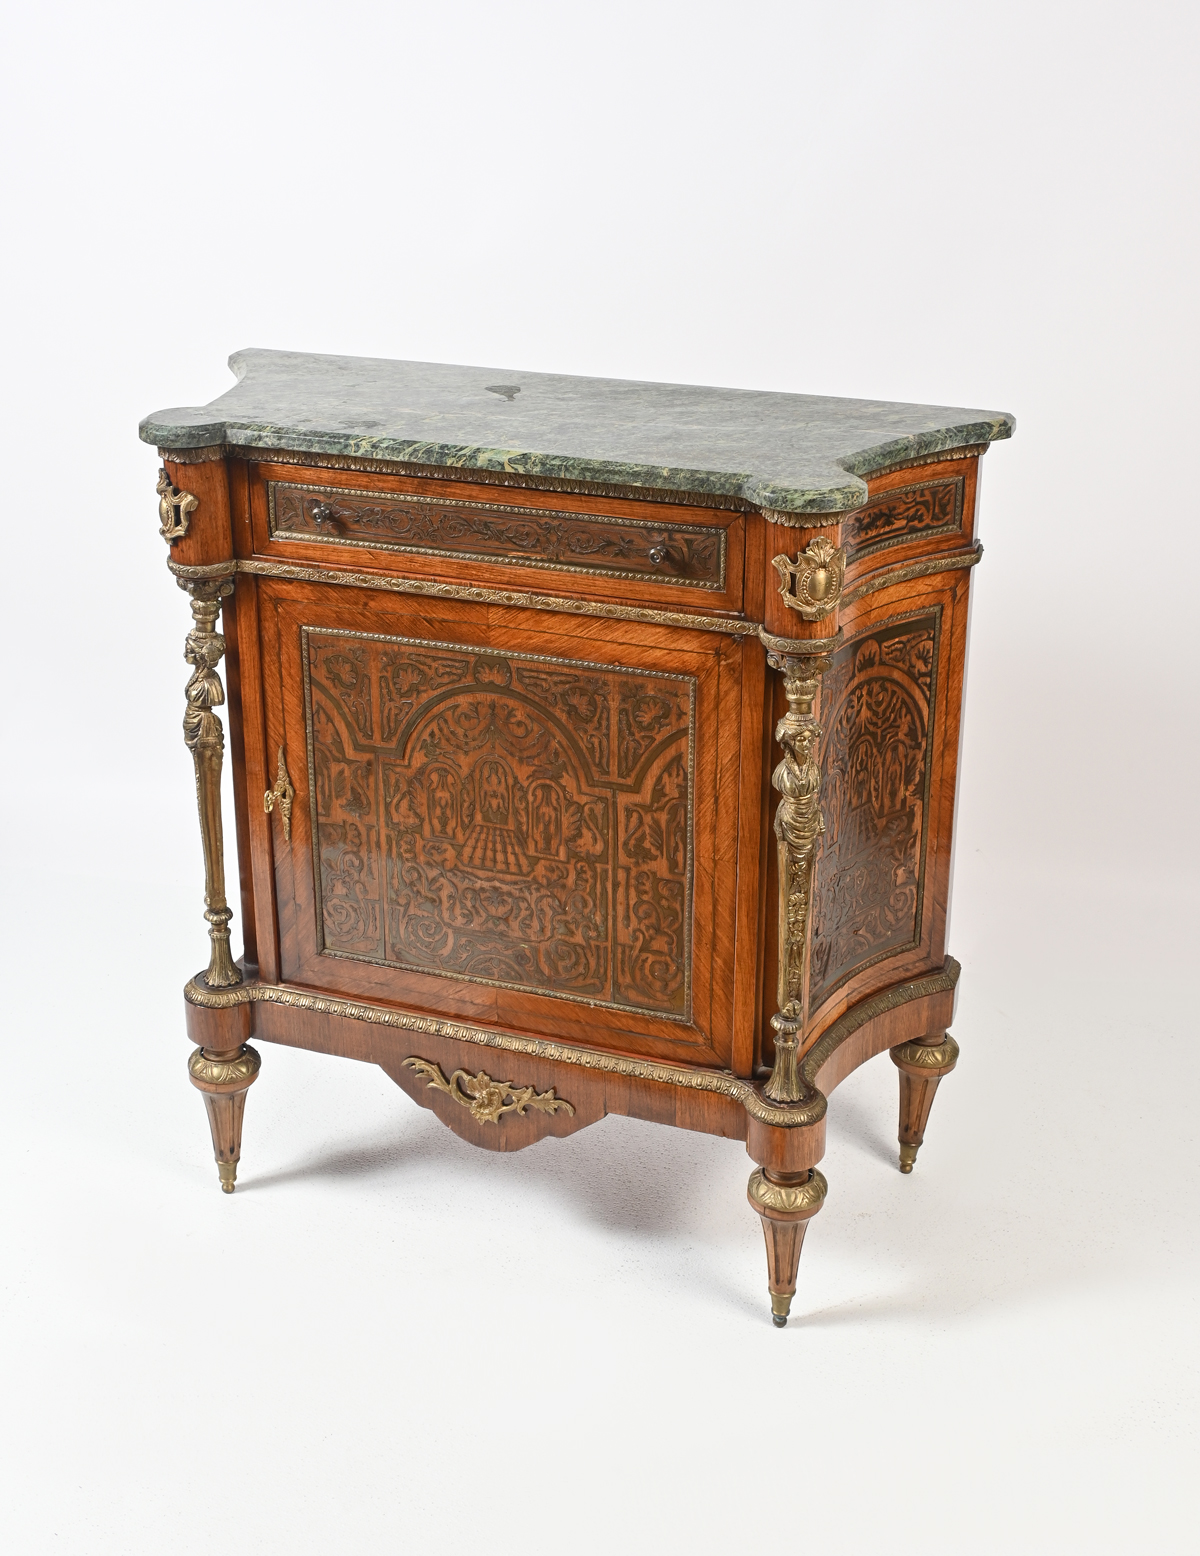 BOULLE INLAID MARBLE TOP CABINET: